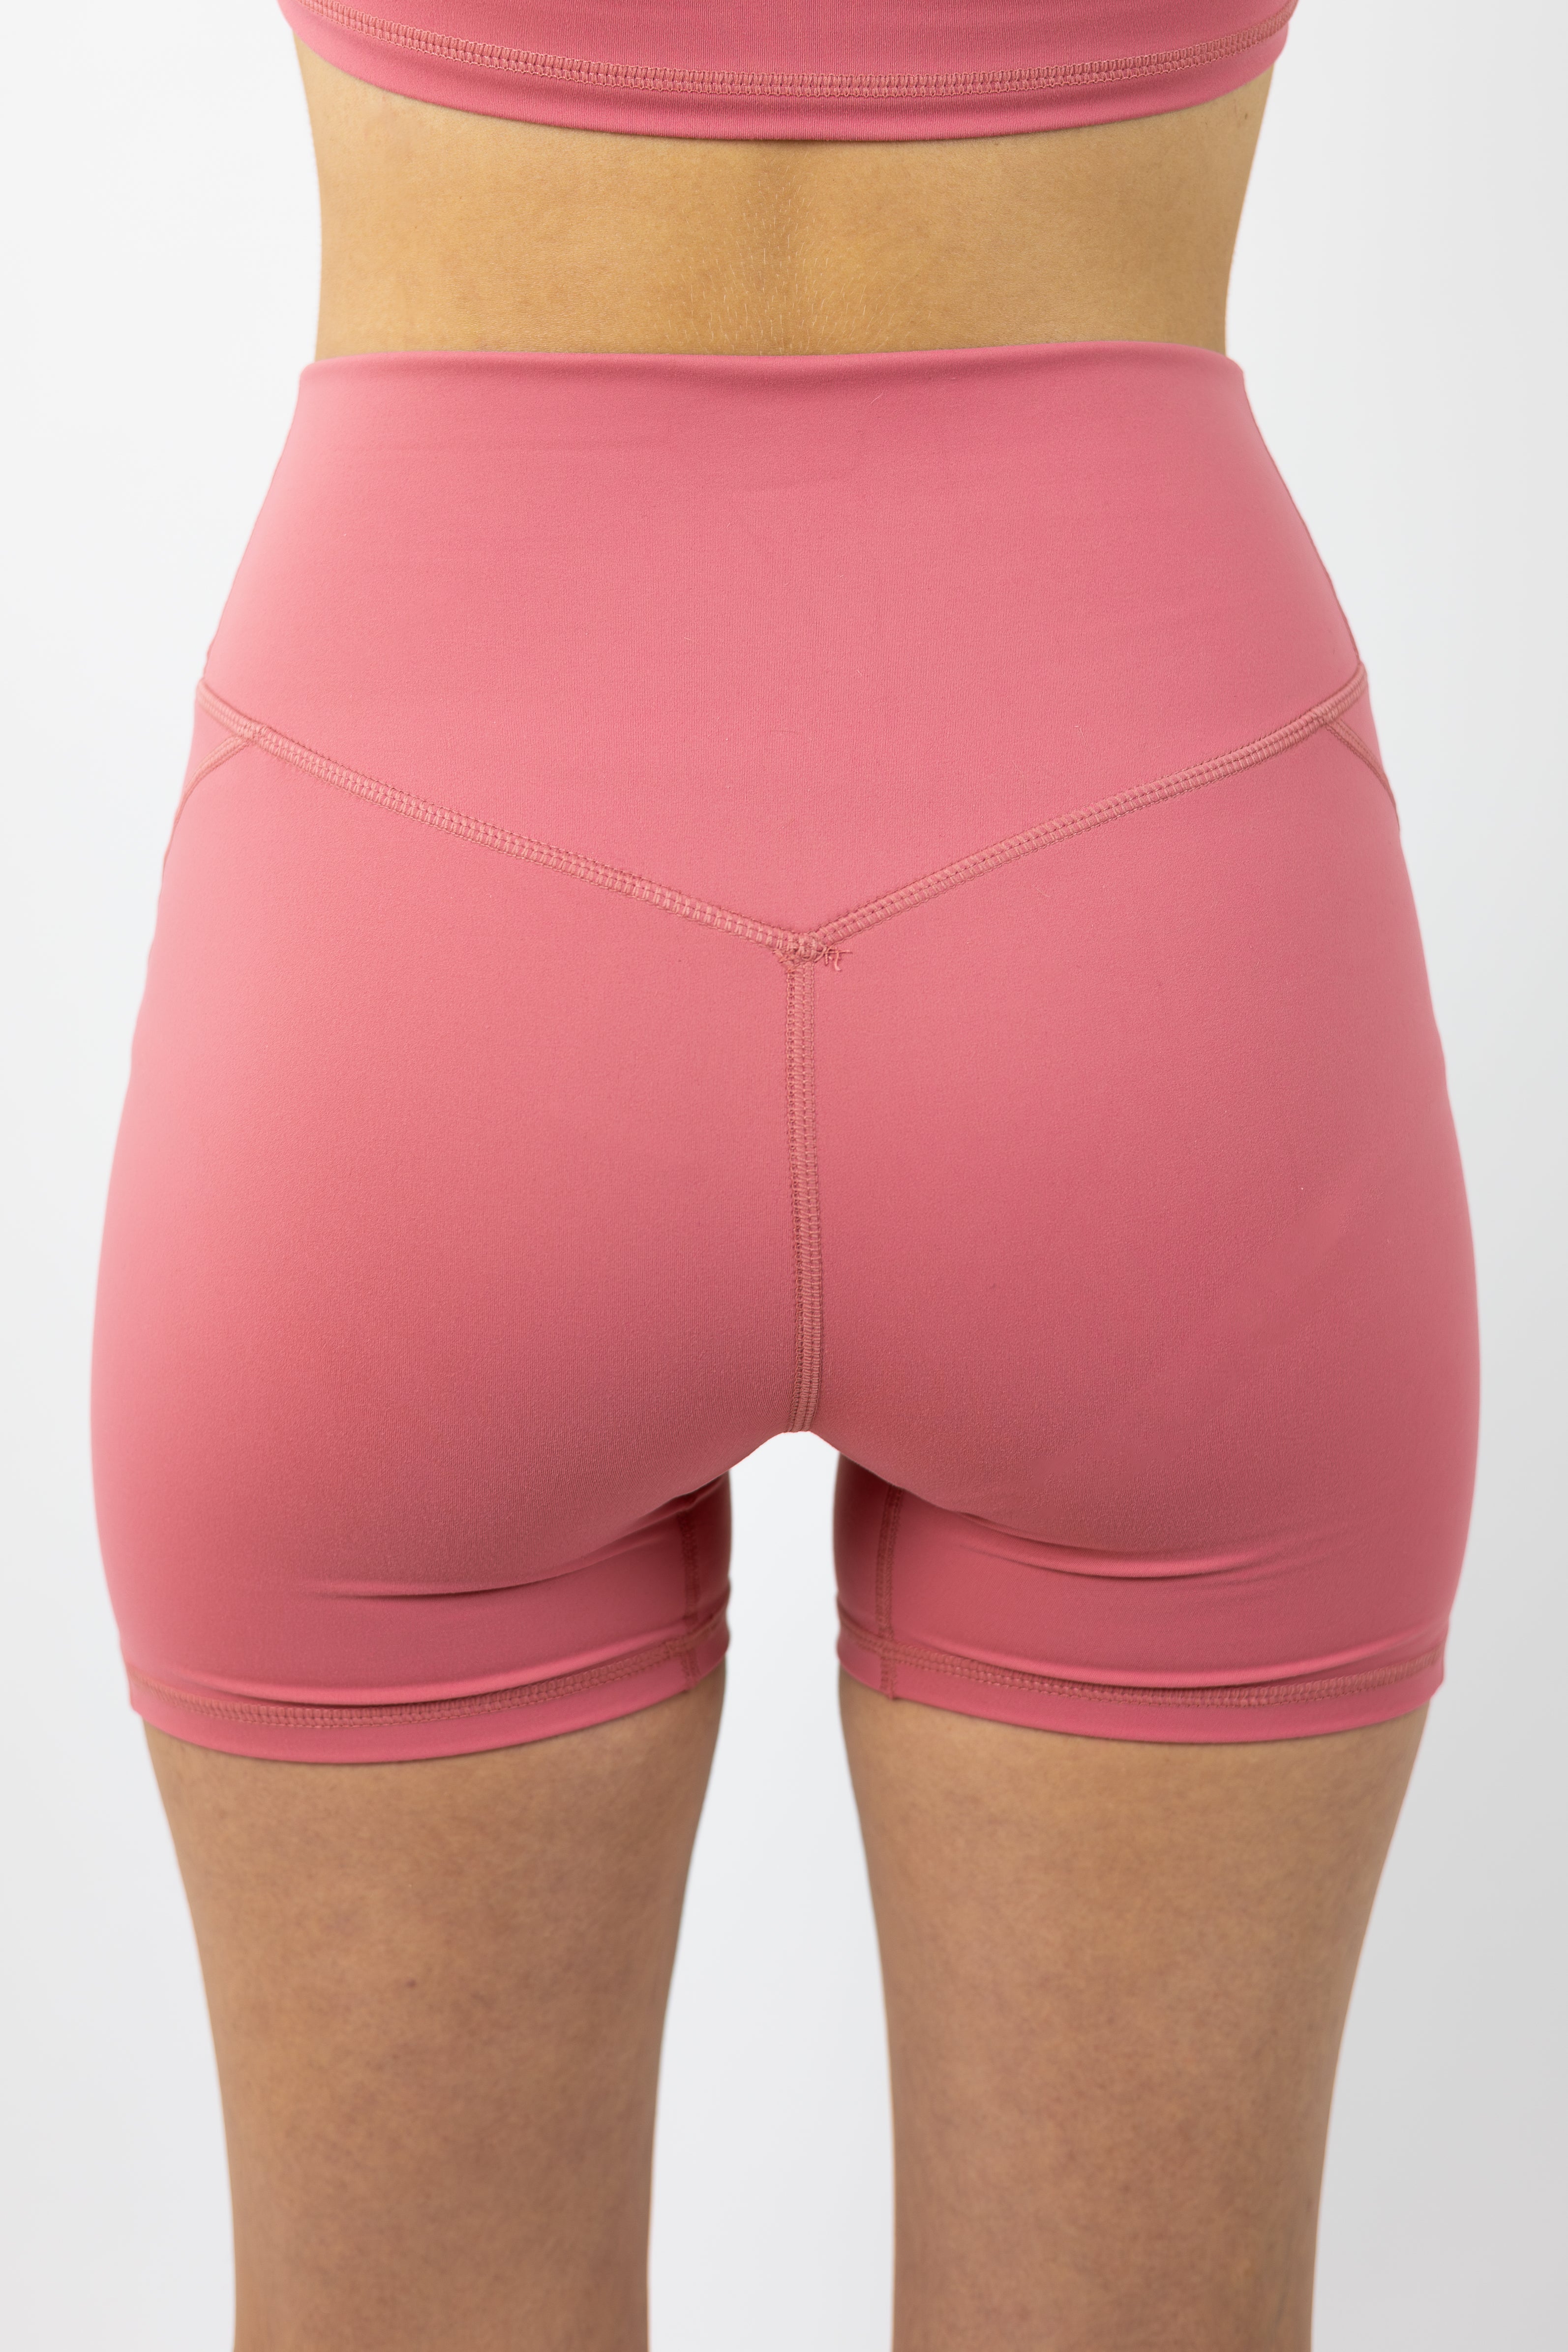 rear view of medium pink form fitting Strength of One gym shorts modeled by woman